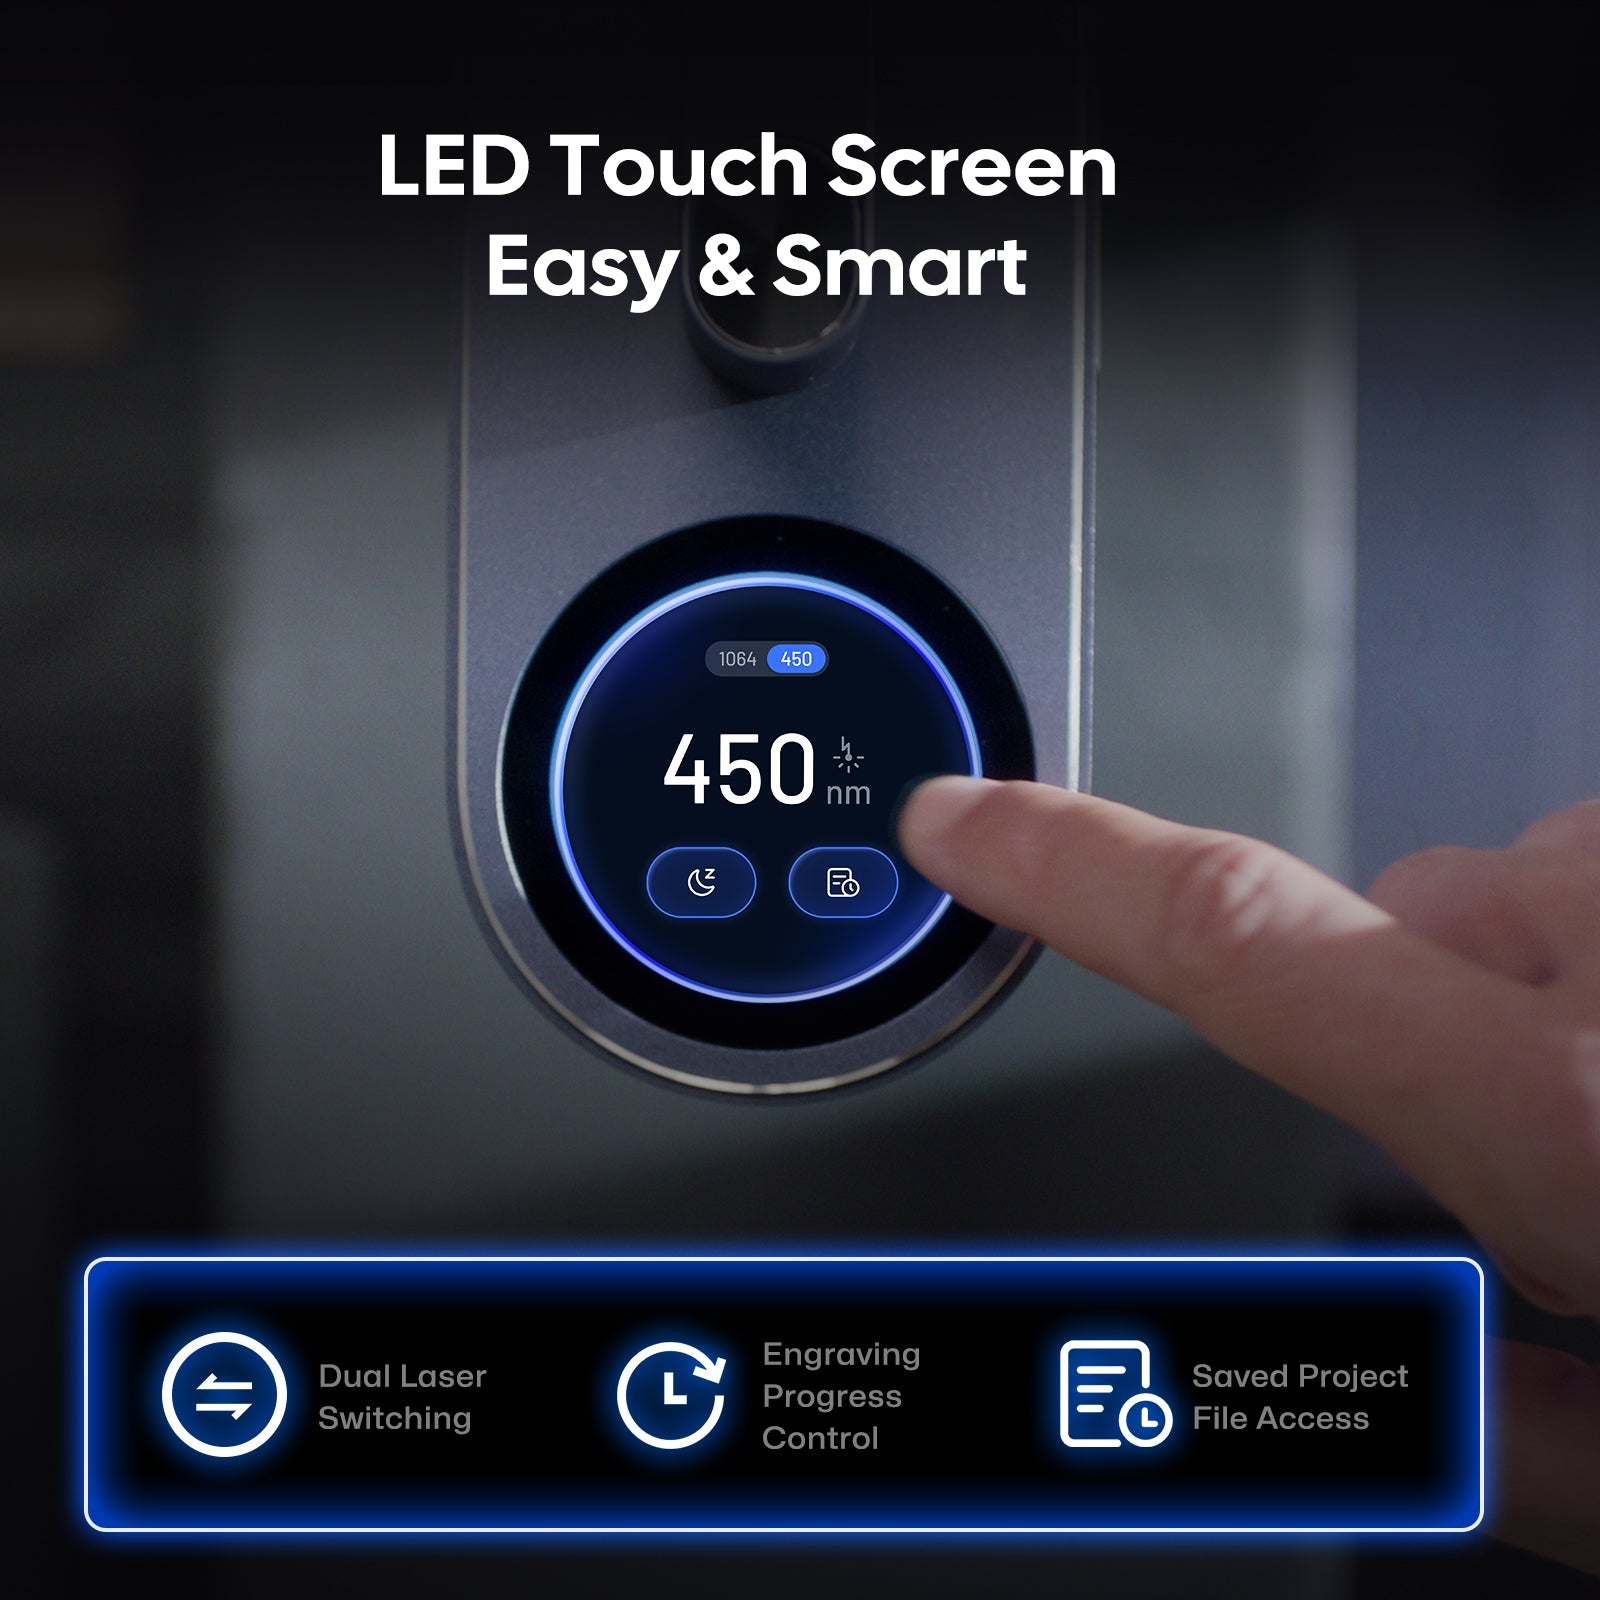 LP4 easy and smart LED touch screen